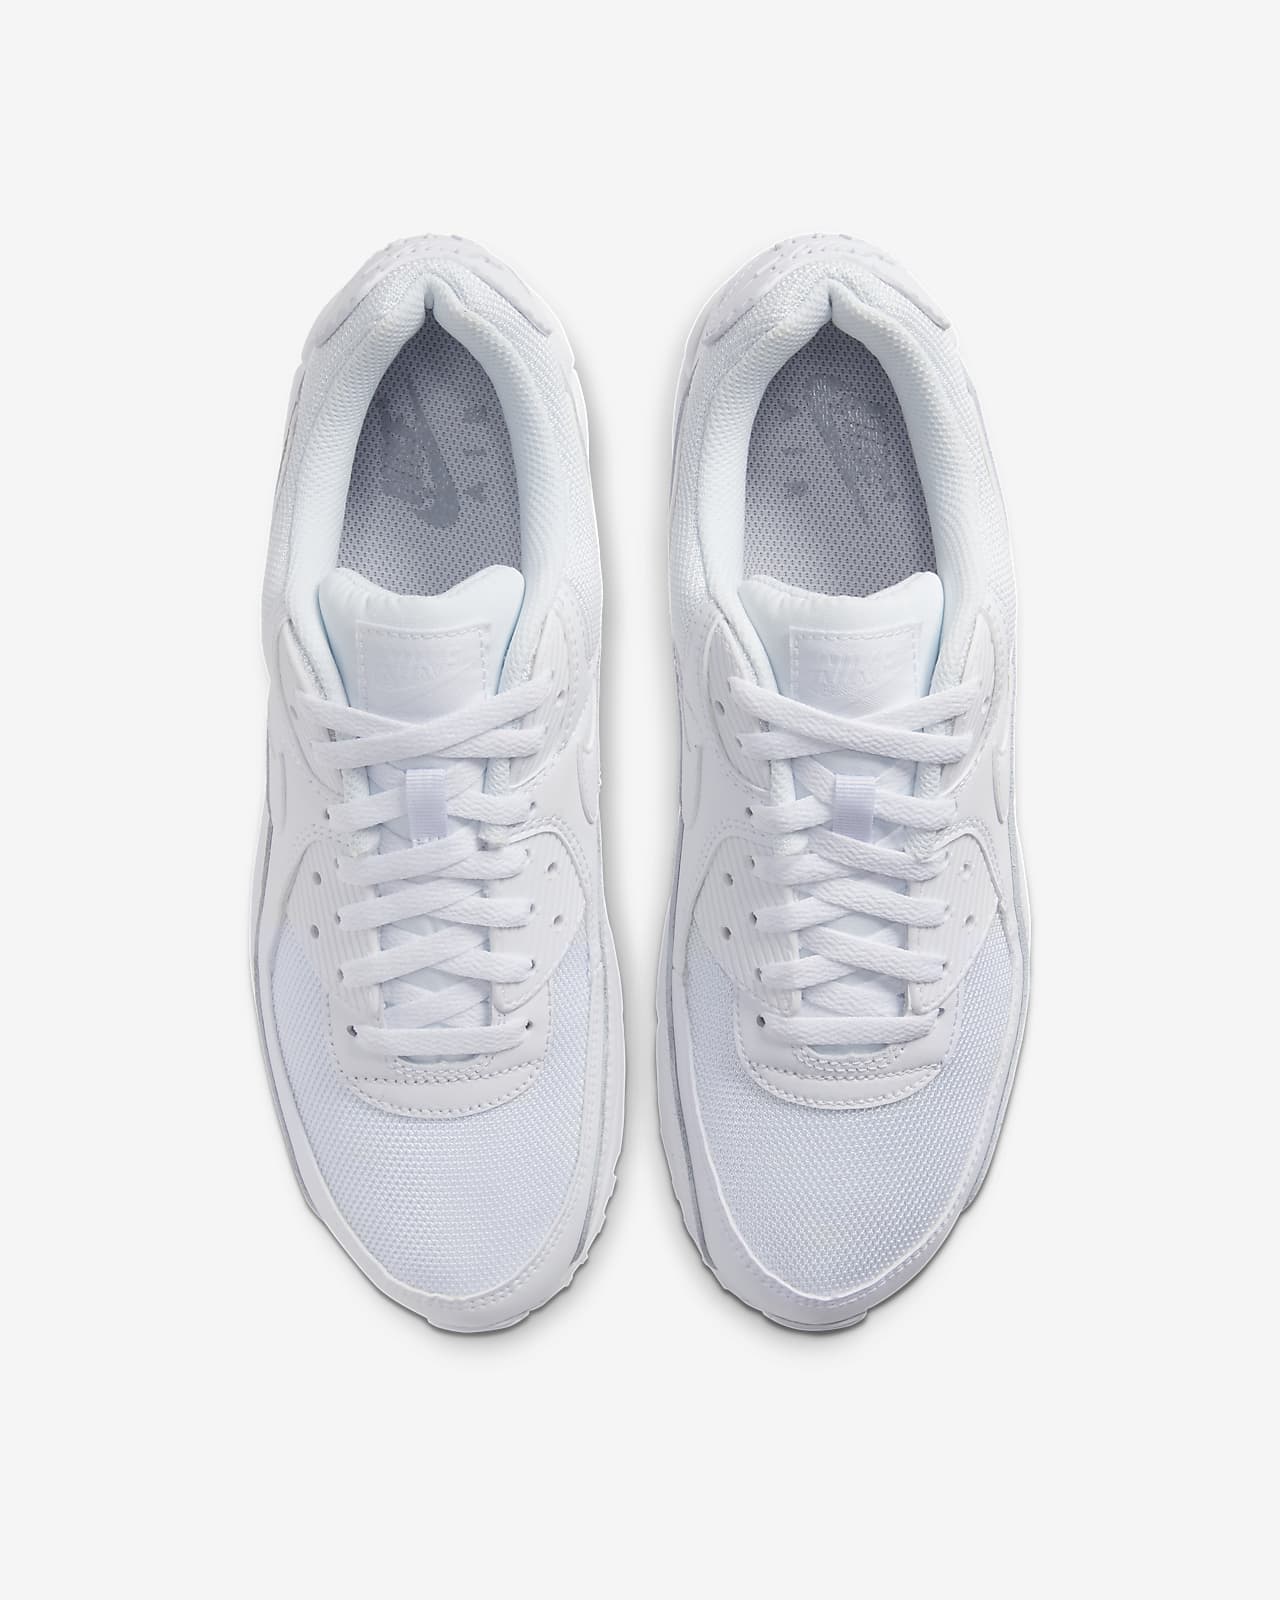 nike shoes white and grey